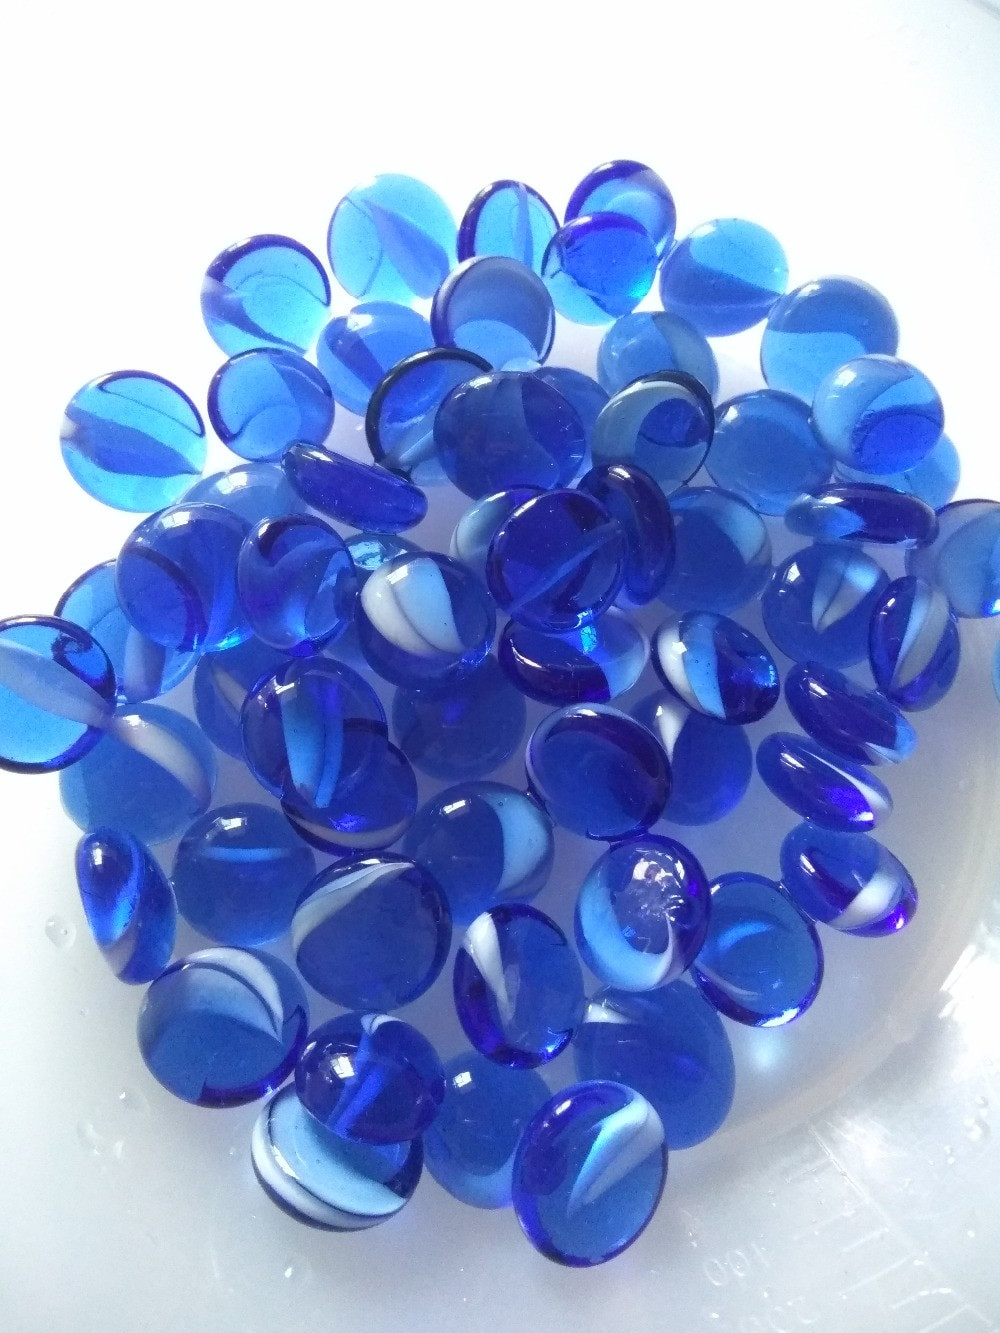 27 Unique Decorative Glass Marbles for Vases 2022 free download decorative glass marbles for vases of aliexpress com buy blue white color flat glass beads cats eye with regard to aliexpress com buy blue white color flat glass beads cats eye stickers home